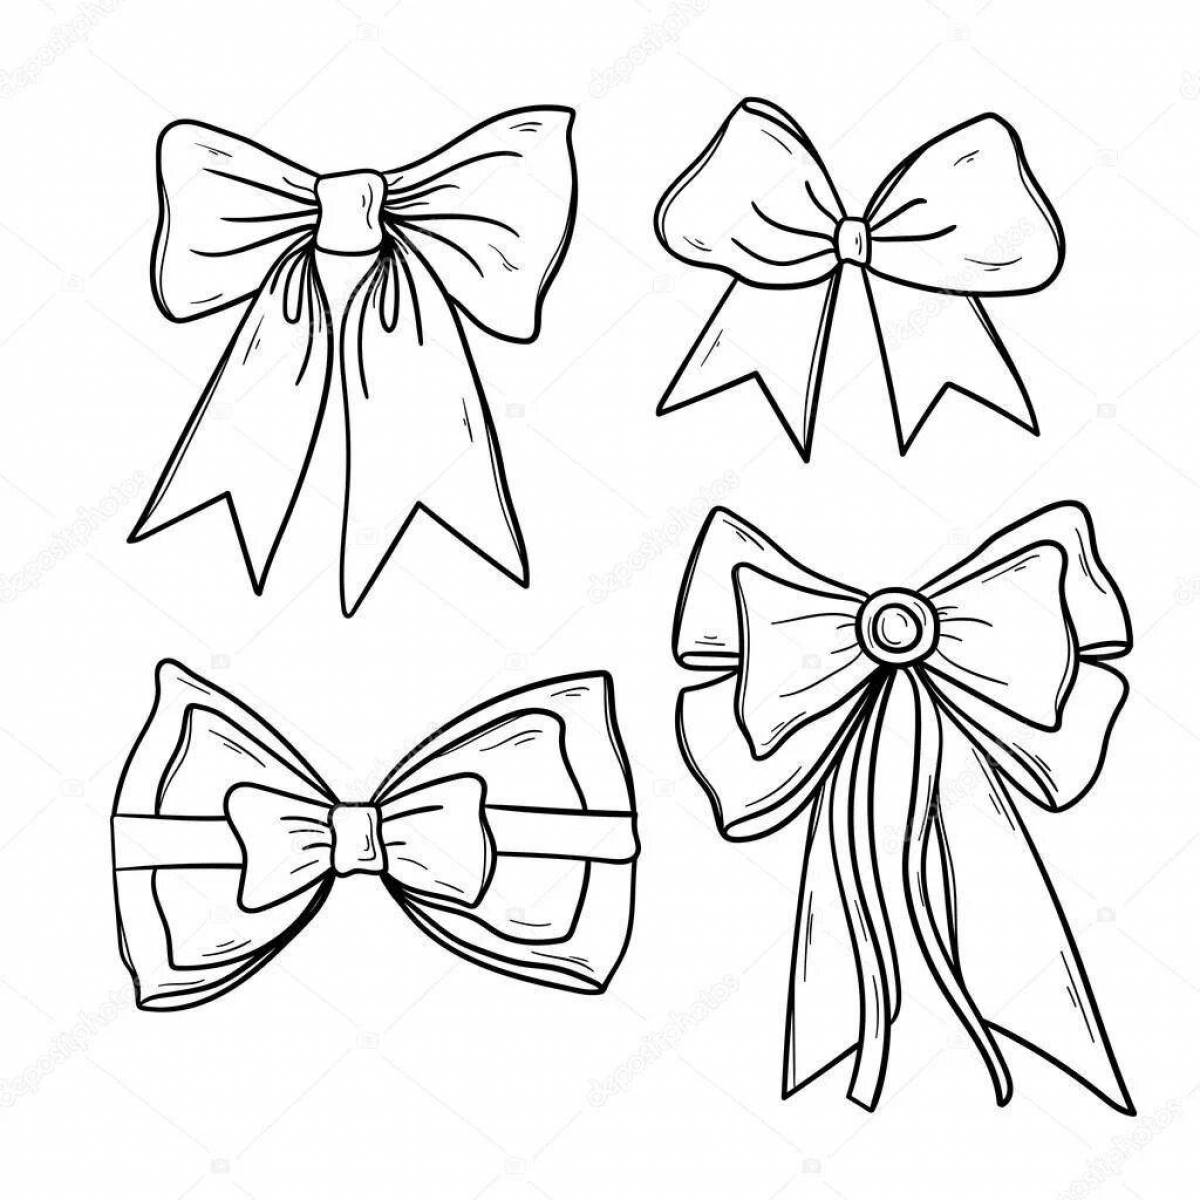 Adorable bow coloring book for kids